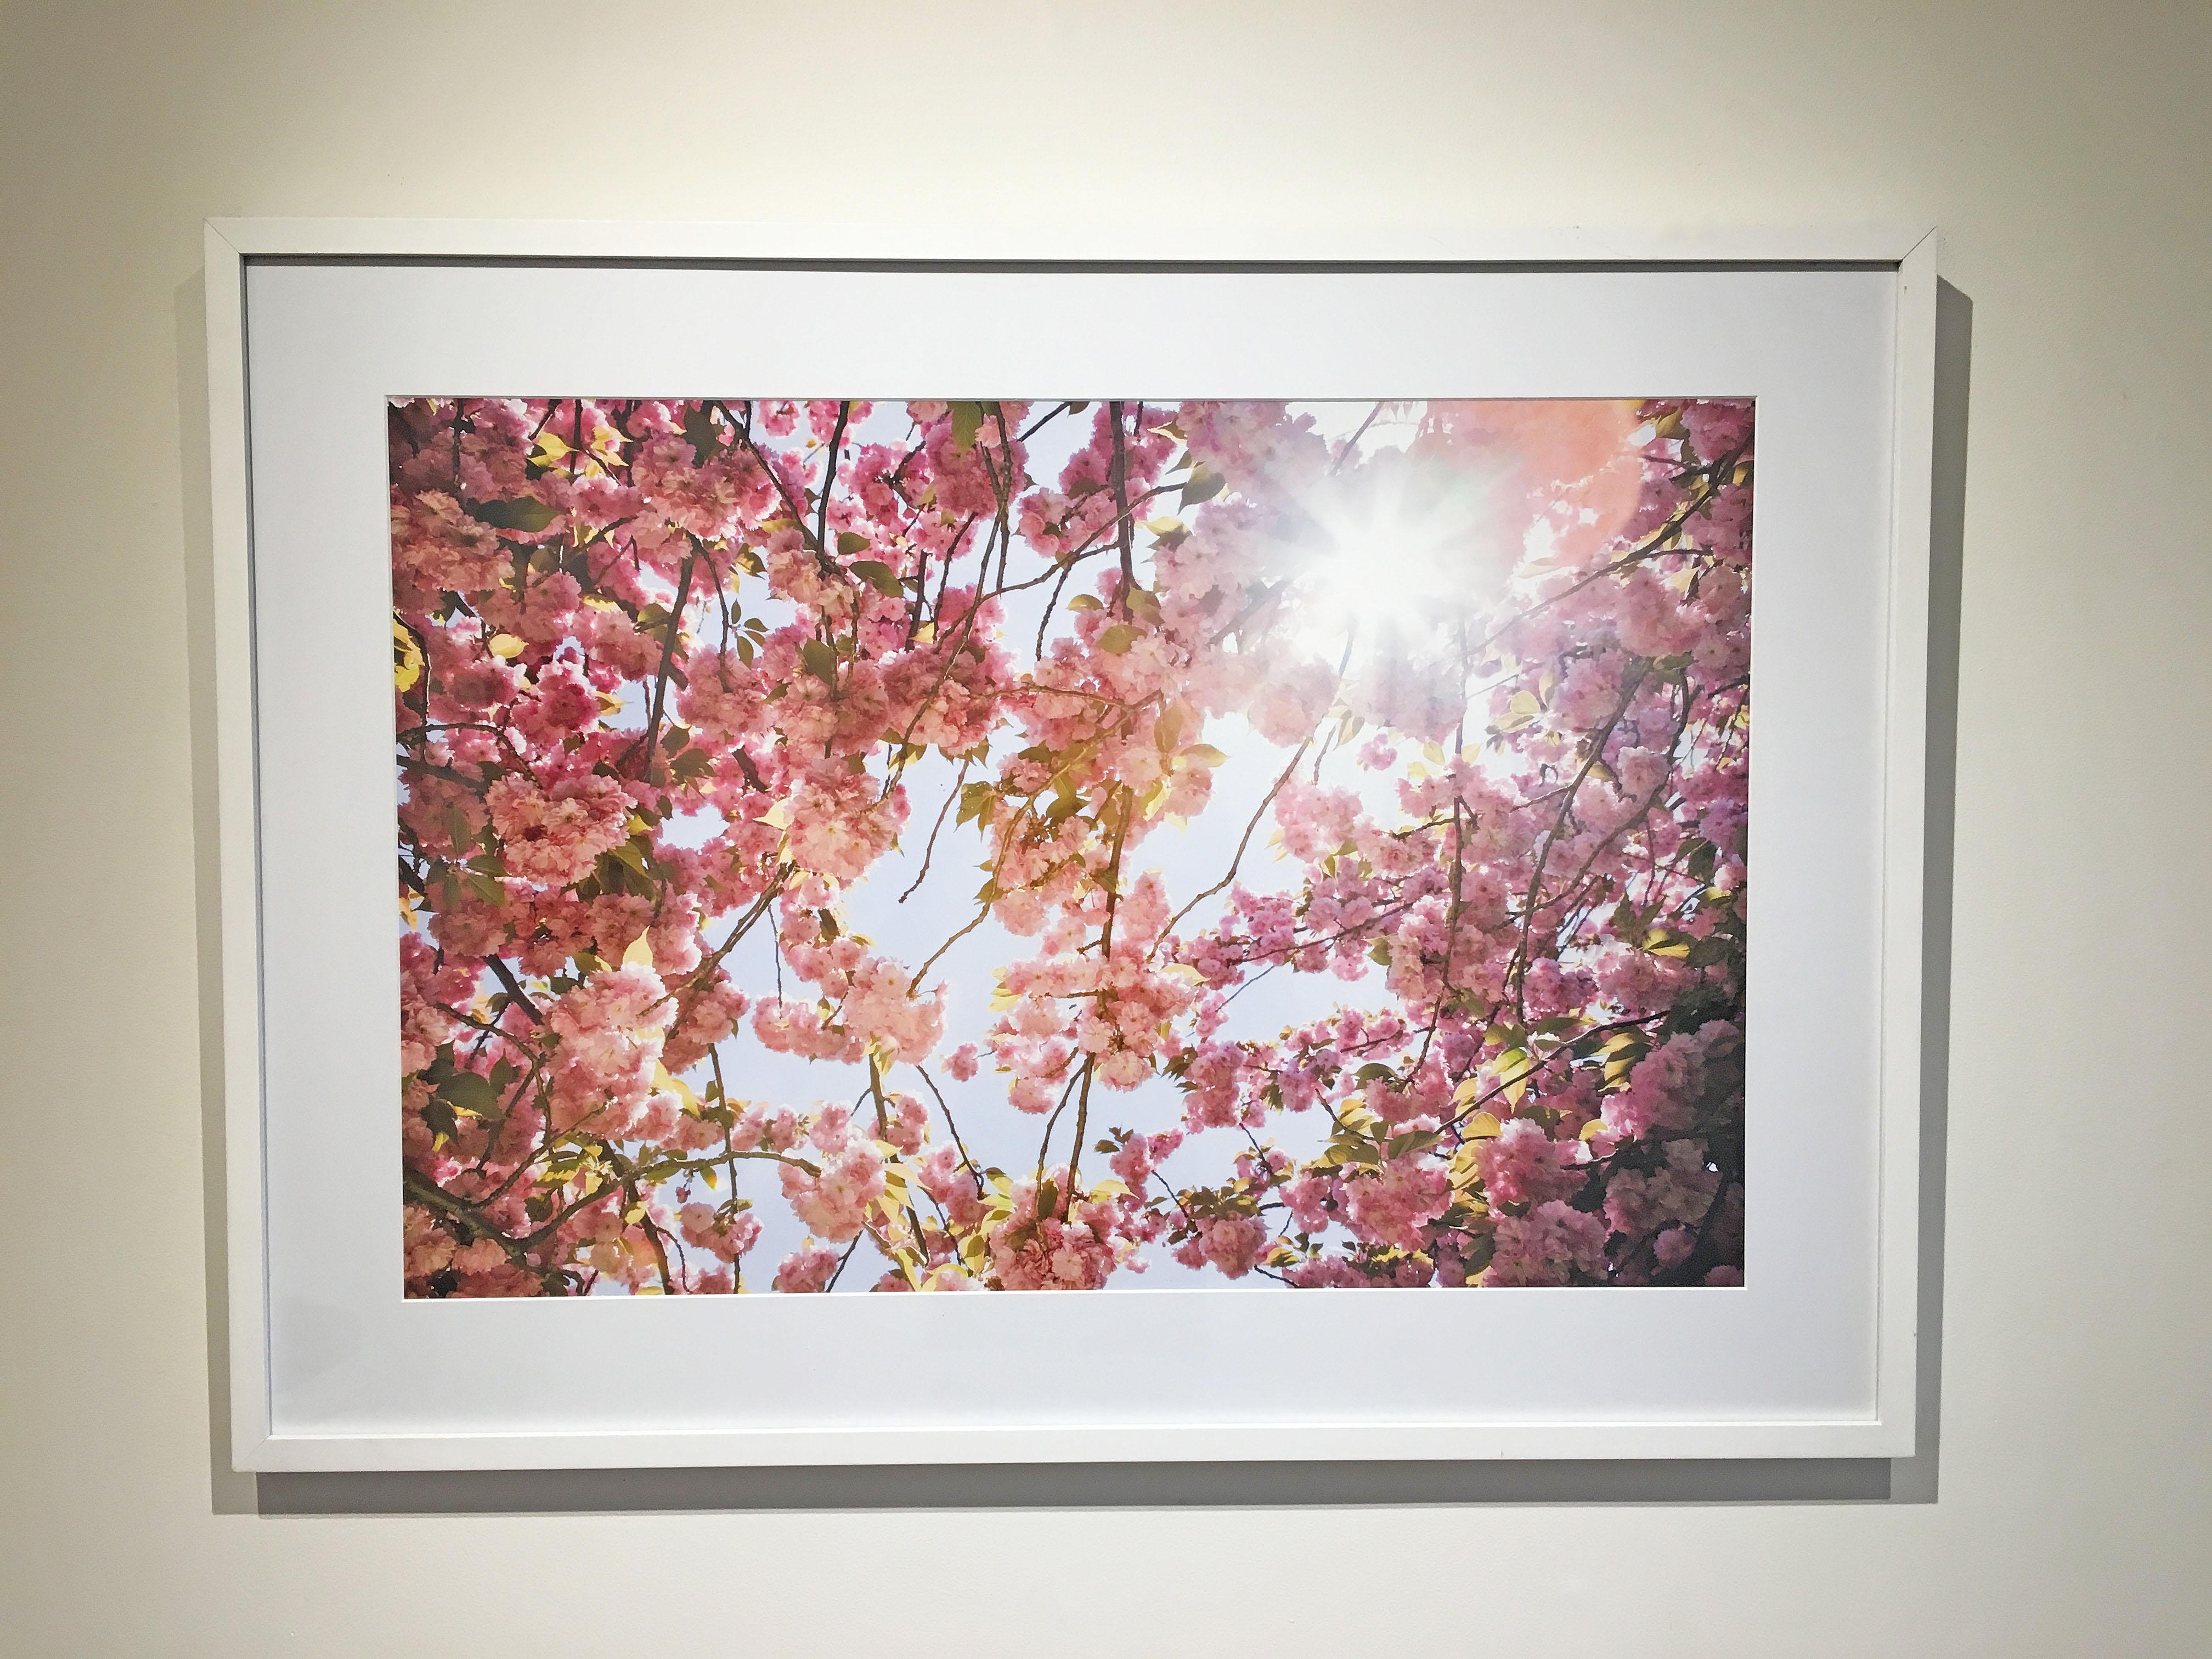 'Cherry Blossom 1' 2002 by Susan Wides. Chromogenic print, 20 x 30 in. / 27 x 37 in. (frame). This 2002 color photo features a close up view of several cherry tree branches and its flowering blooms in the landscape.  The Sun streams through the